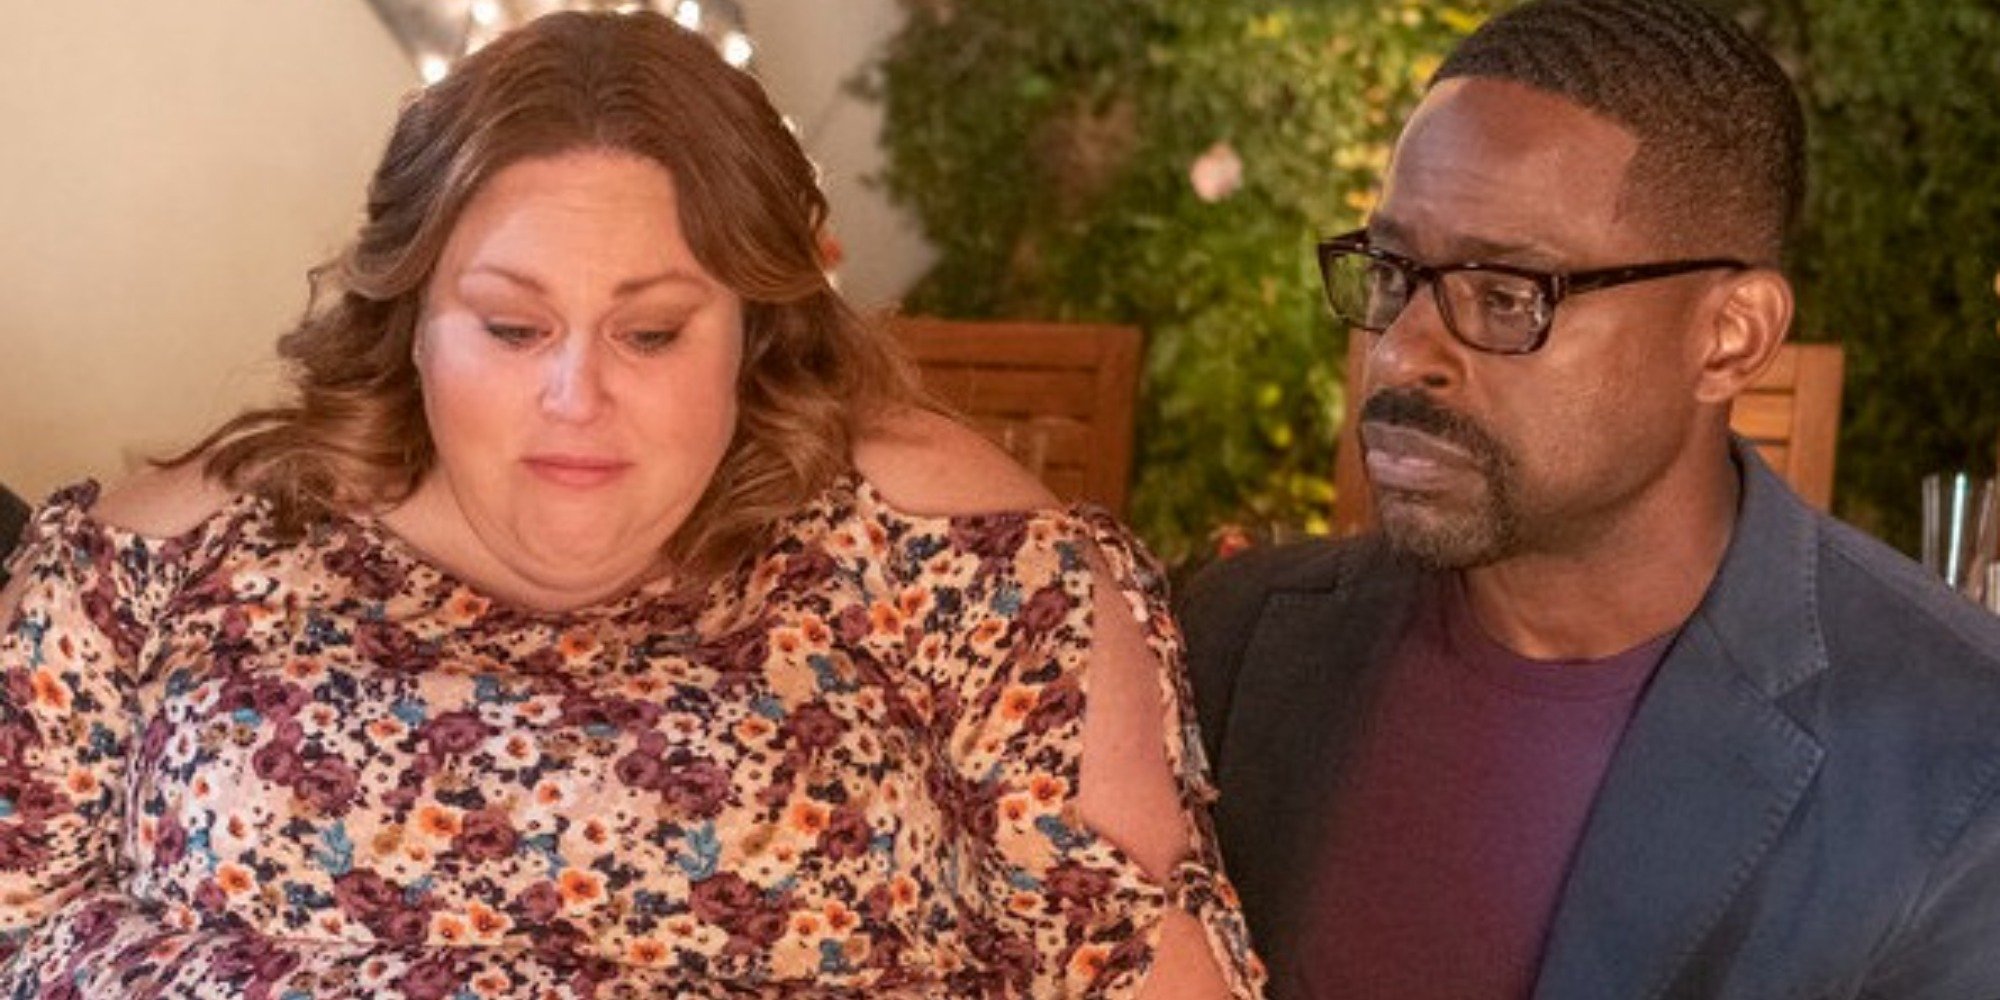 Chrissy Metz and Sterling K. Brown on the set of This Is Us.